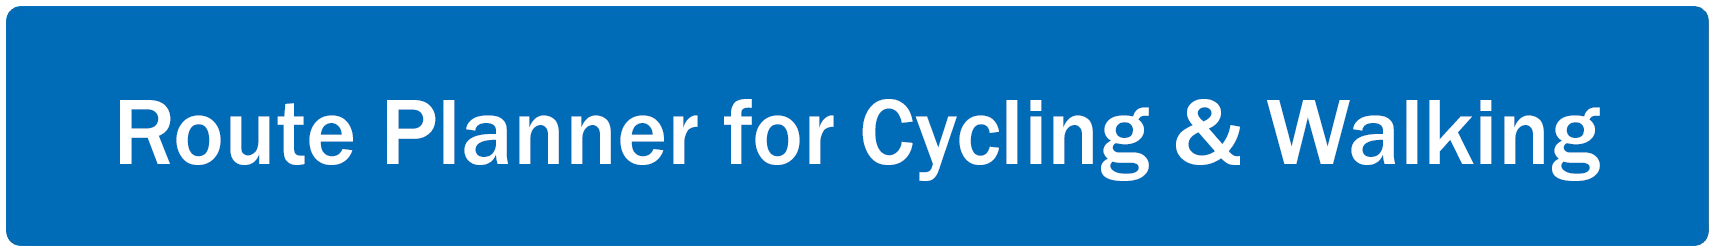 Route Planner for Cycling & Walking